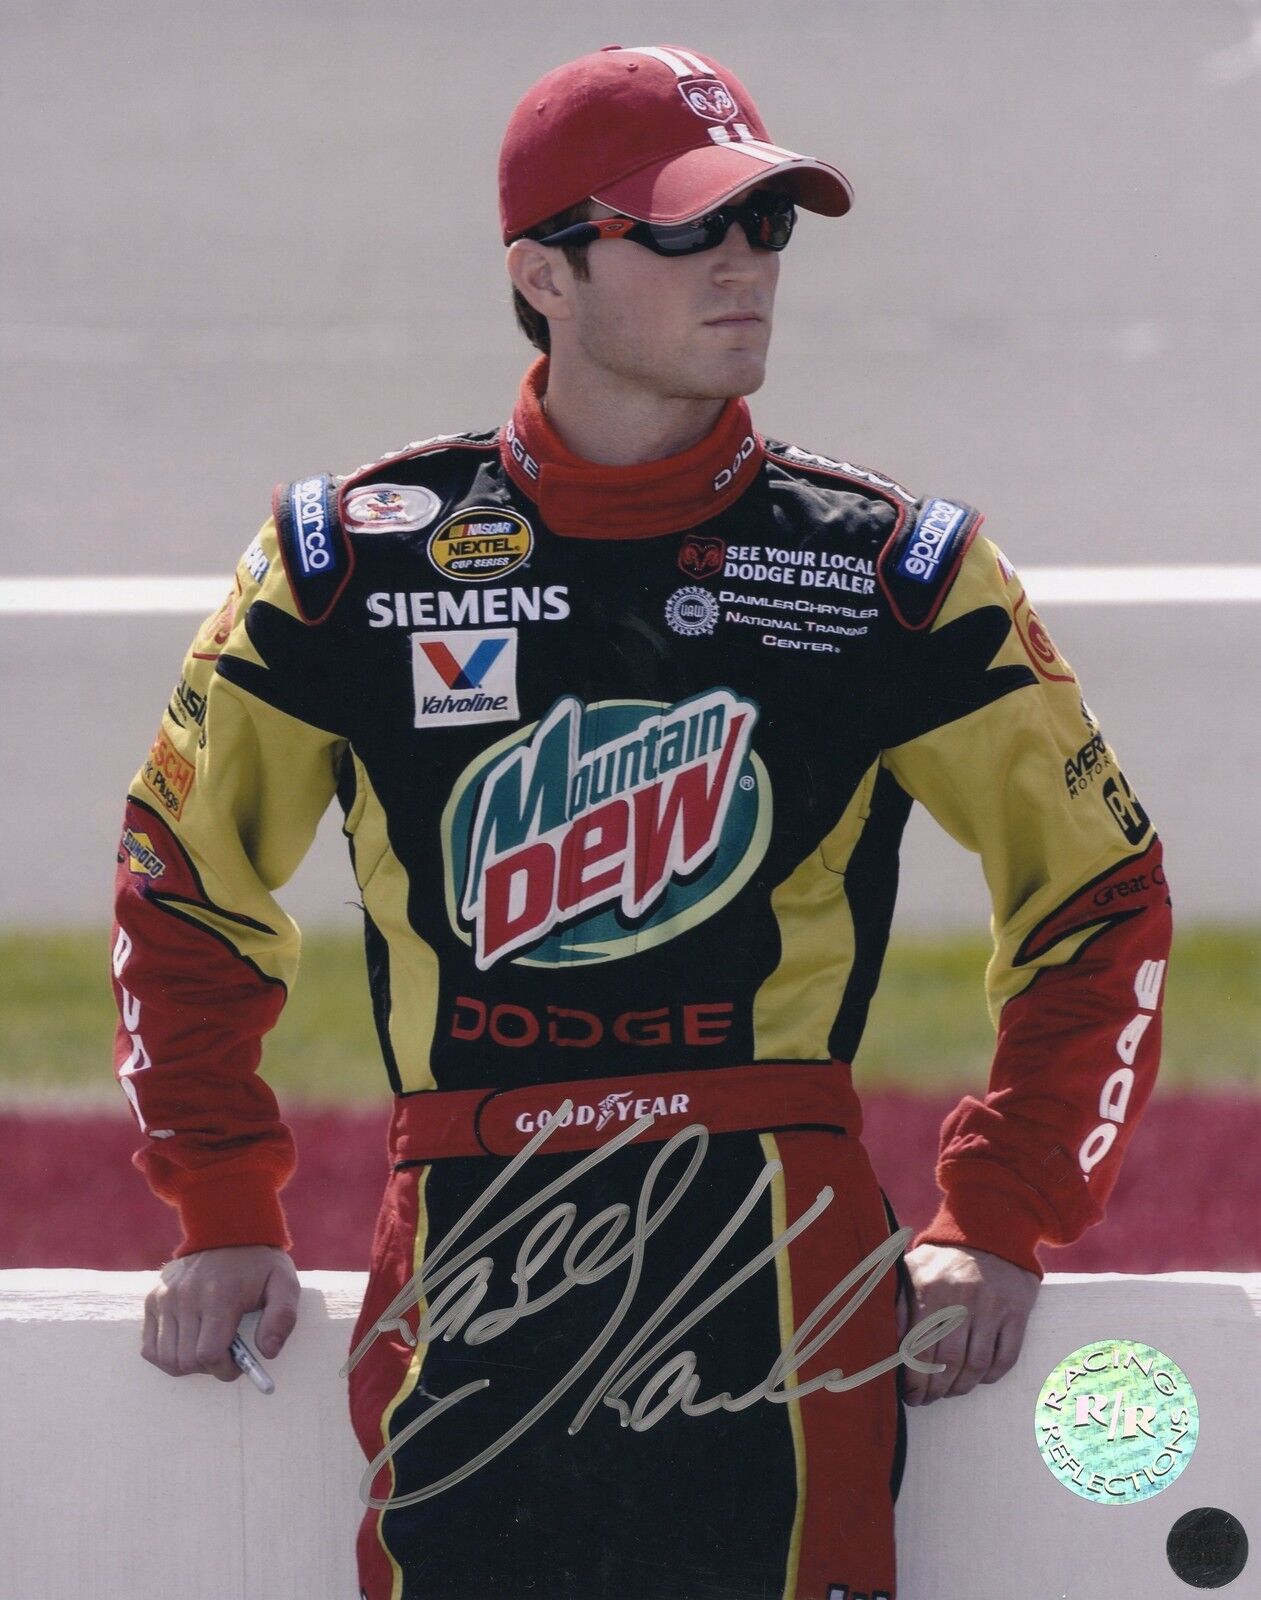 Kasey Kahne 8x10 Photo Poster painting Signed Autographed Auto Authenticated Proco COA NASCAR